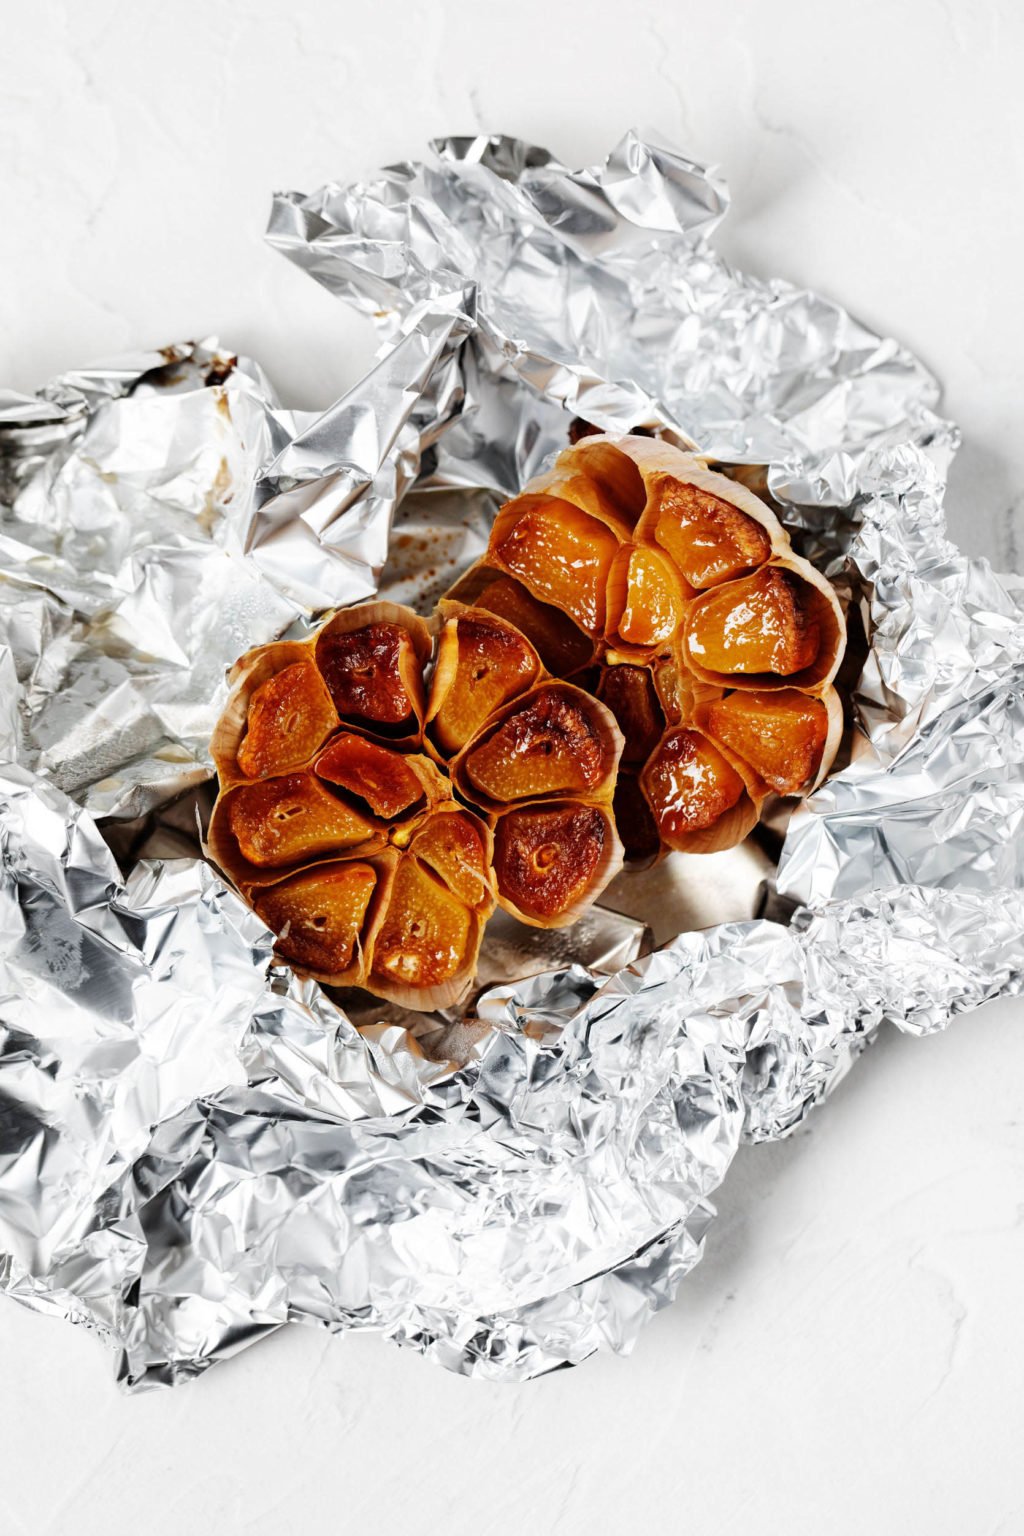 A head of roasted garlic has just been unwrapped from foil.